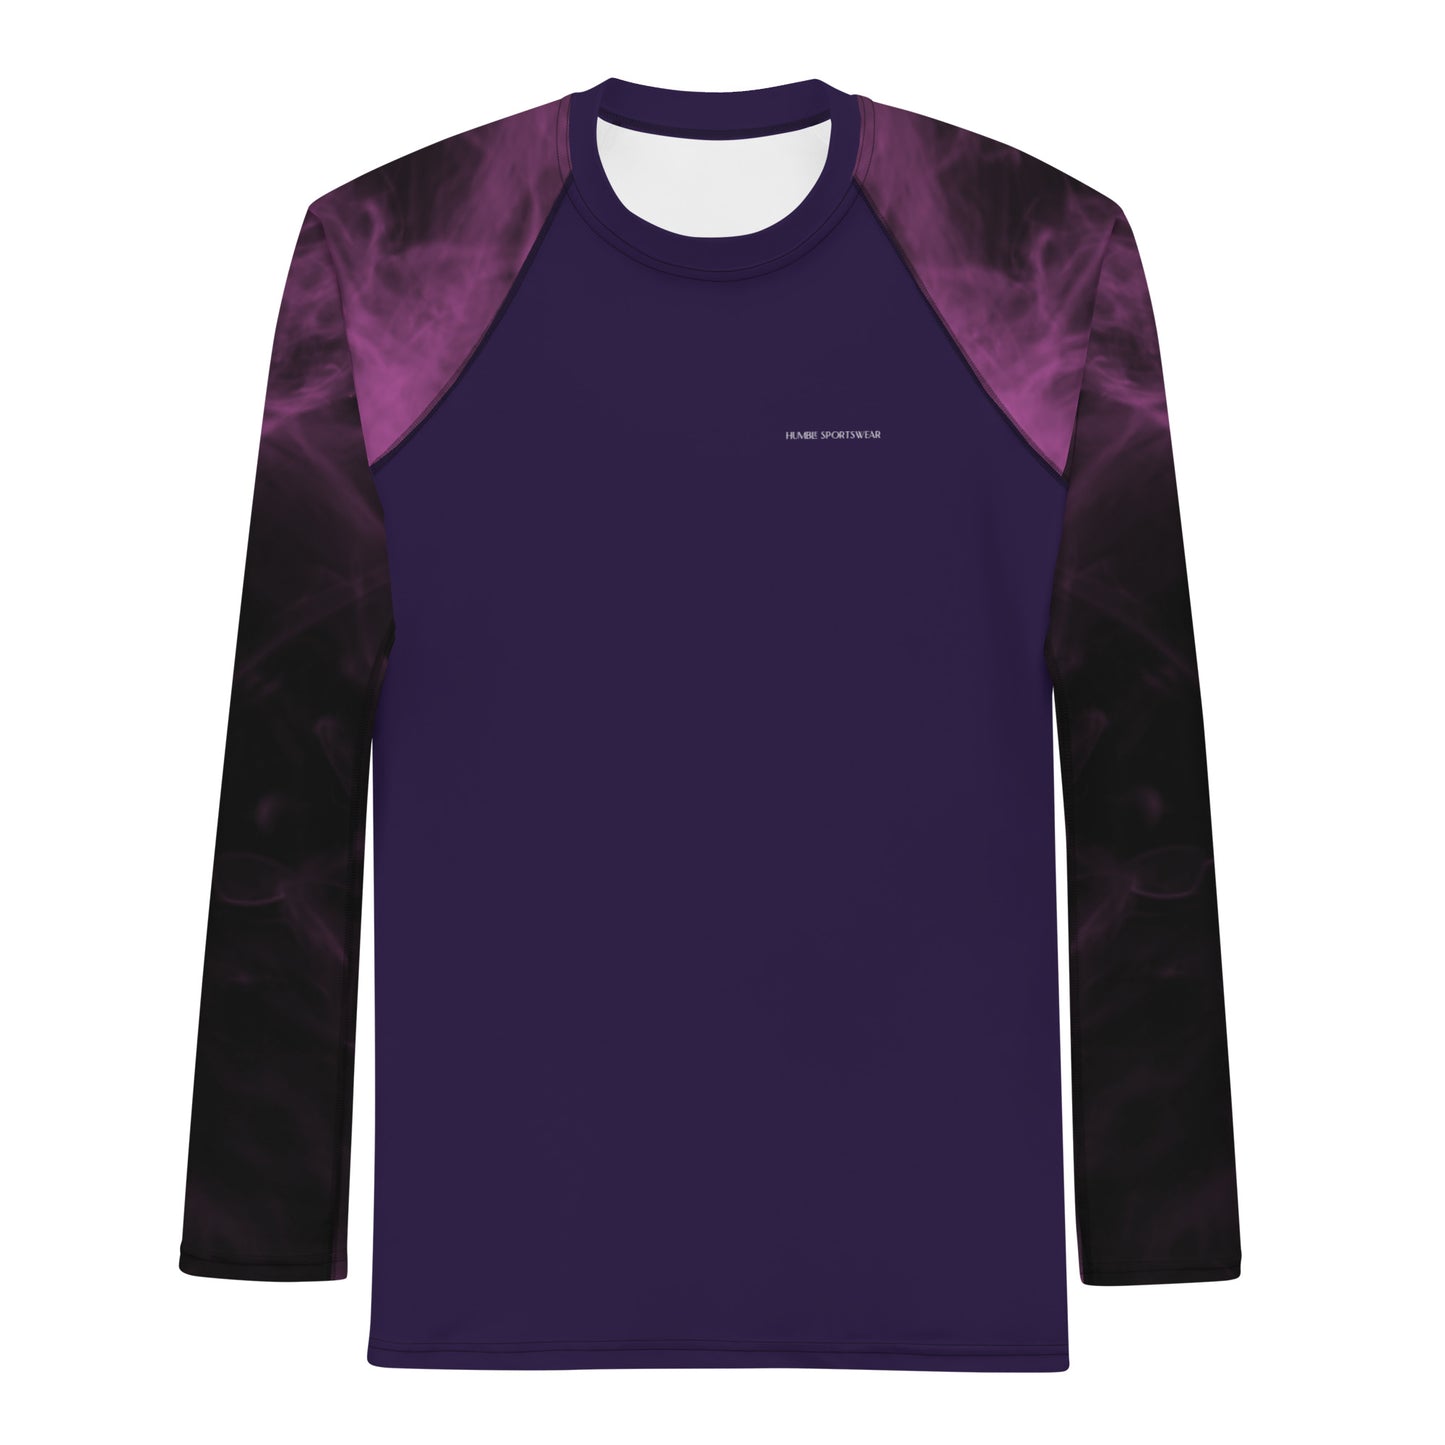 Humble Sportswear, men's color match active wear tops, men's purple compression all-over print long sleeve top